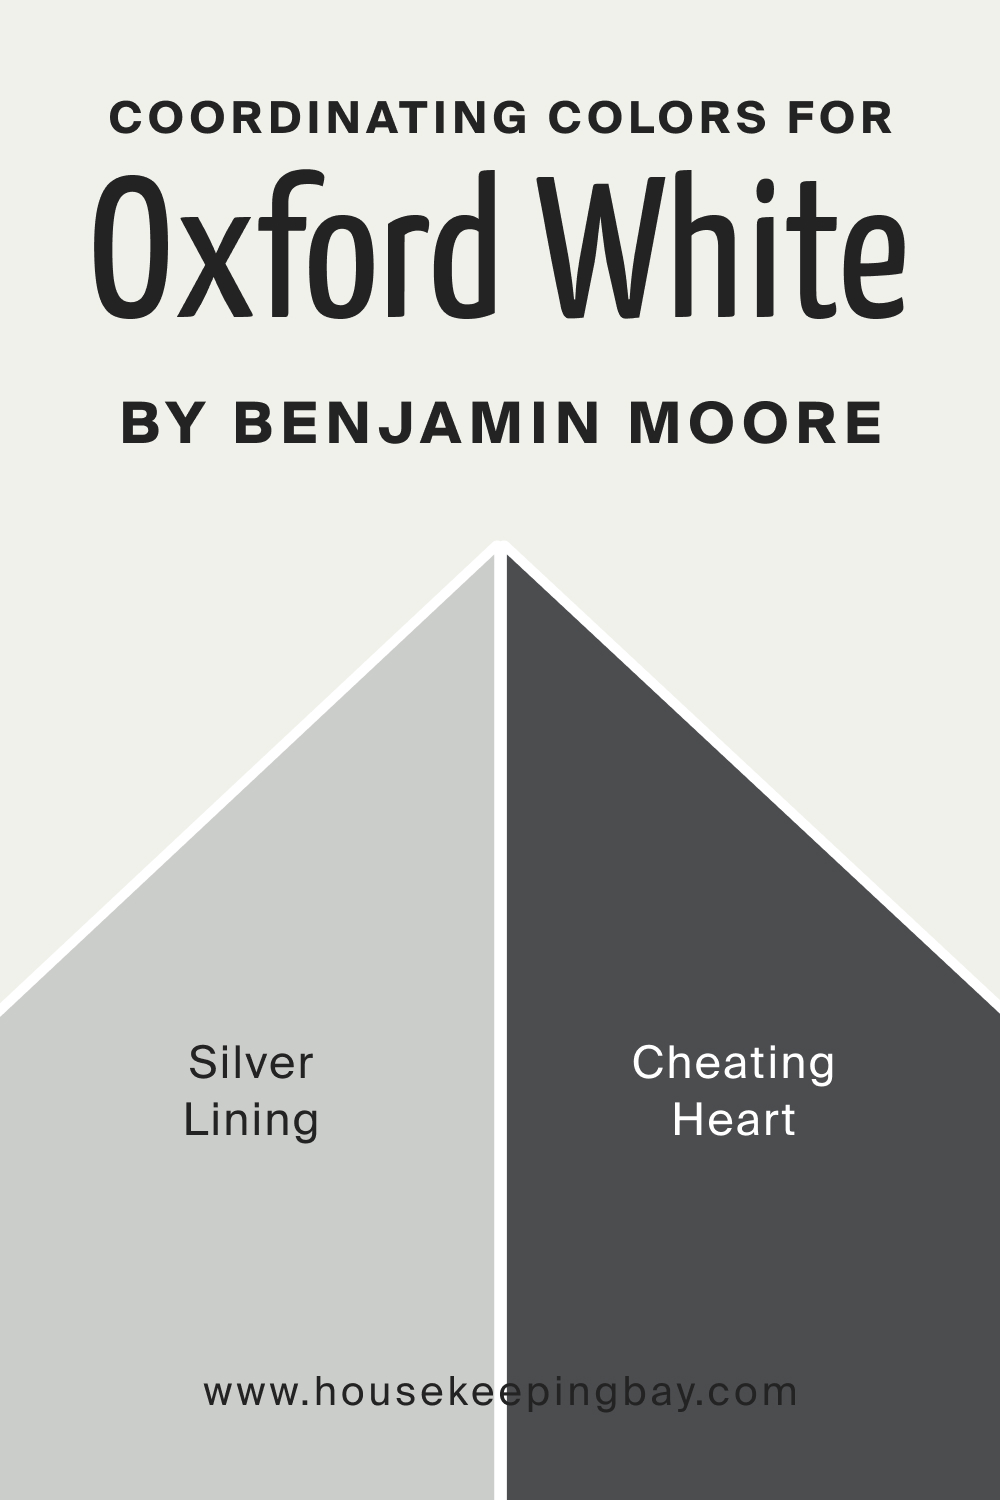 Coordinating Colors for Oxford White CC 30 by Benjamin Moore